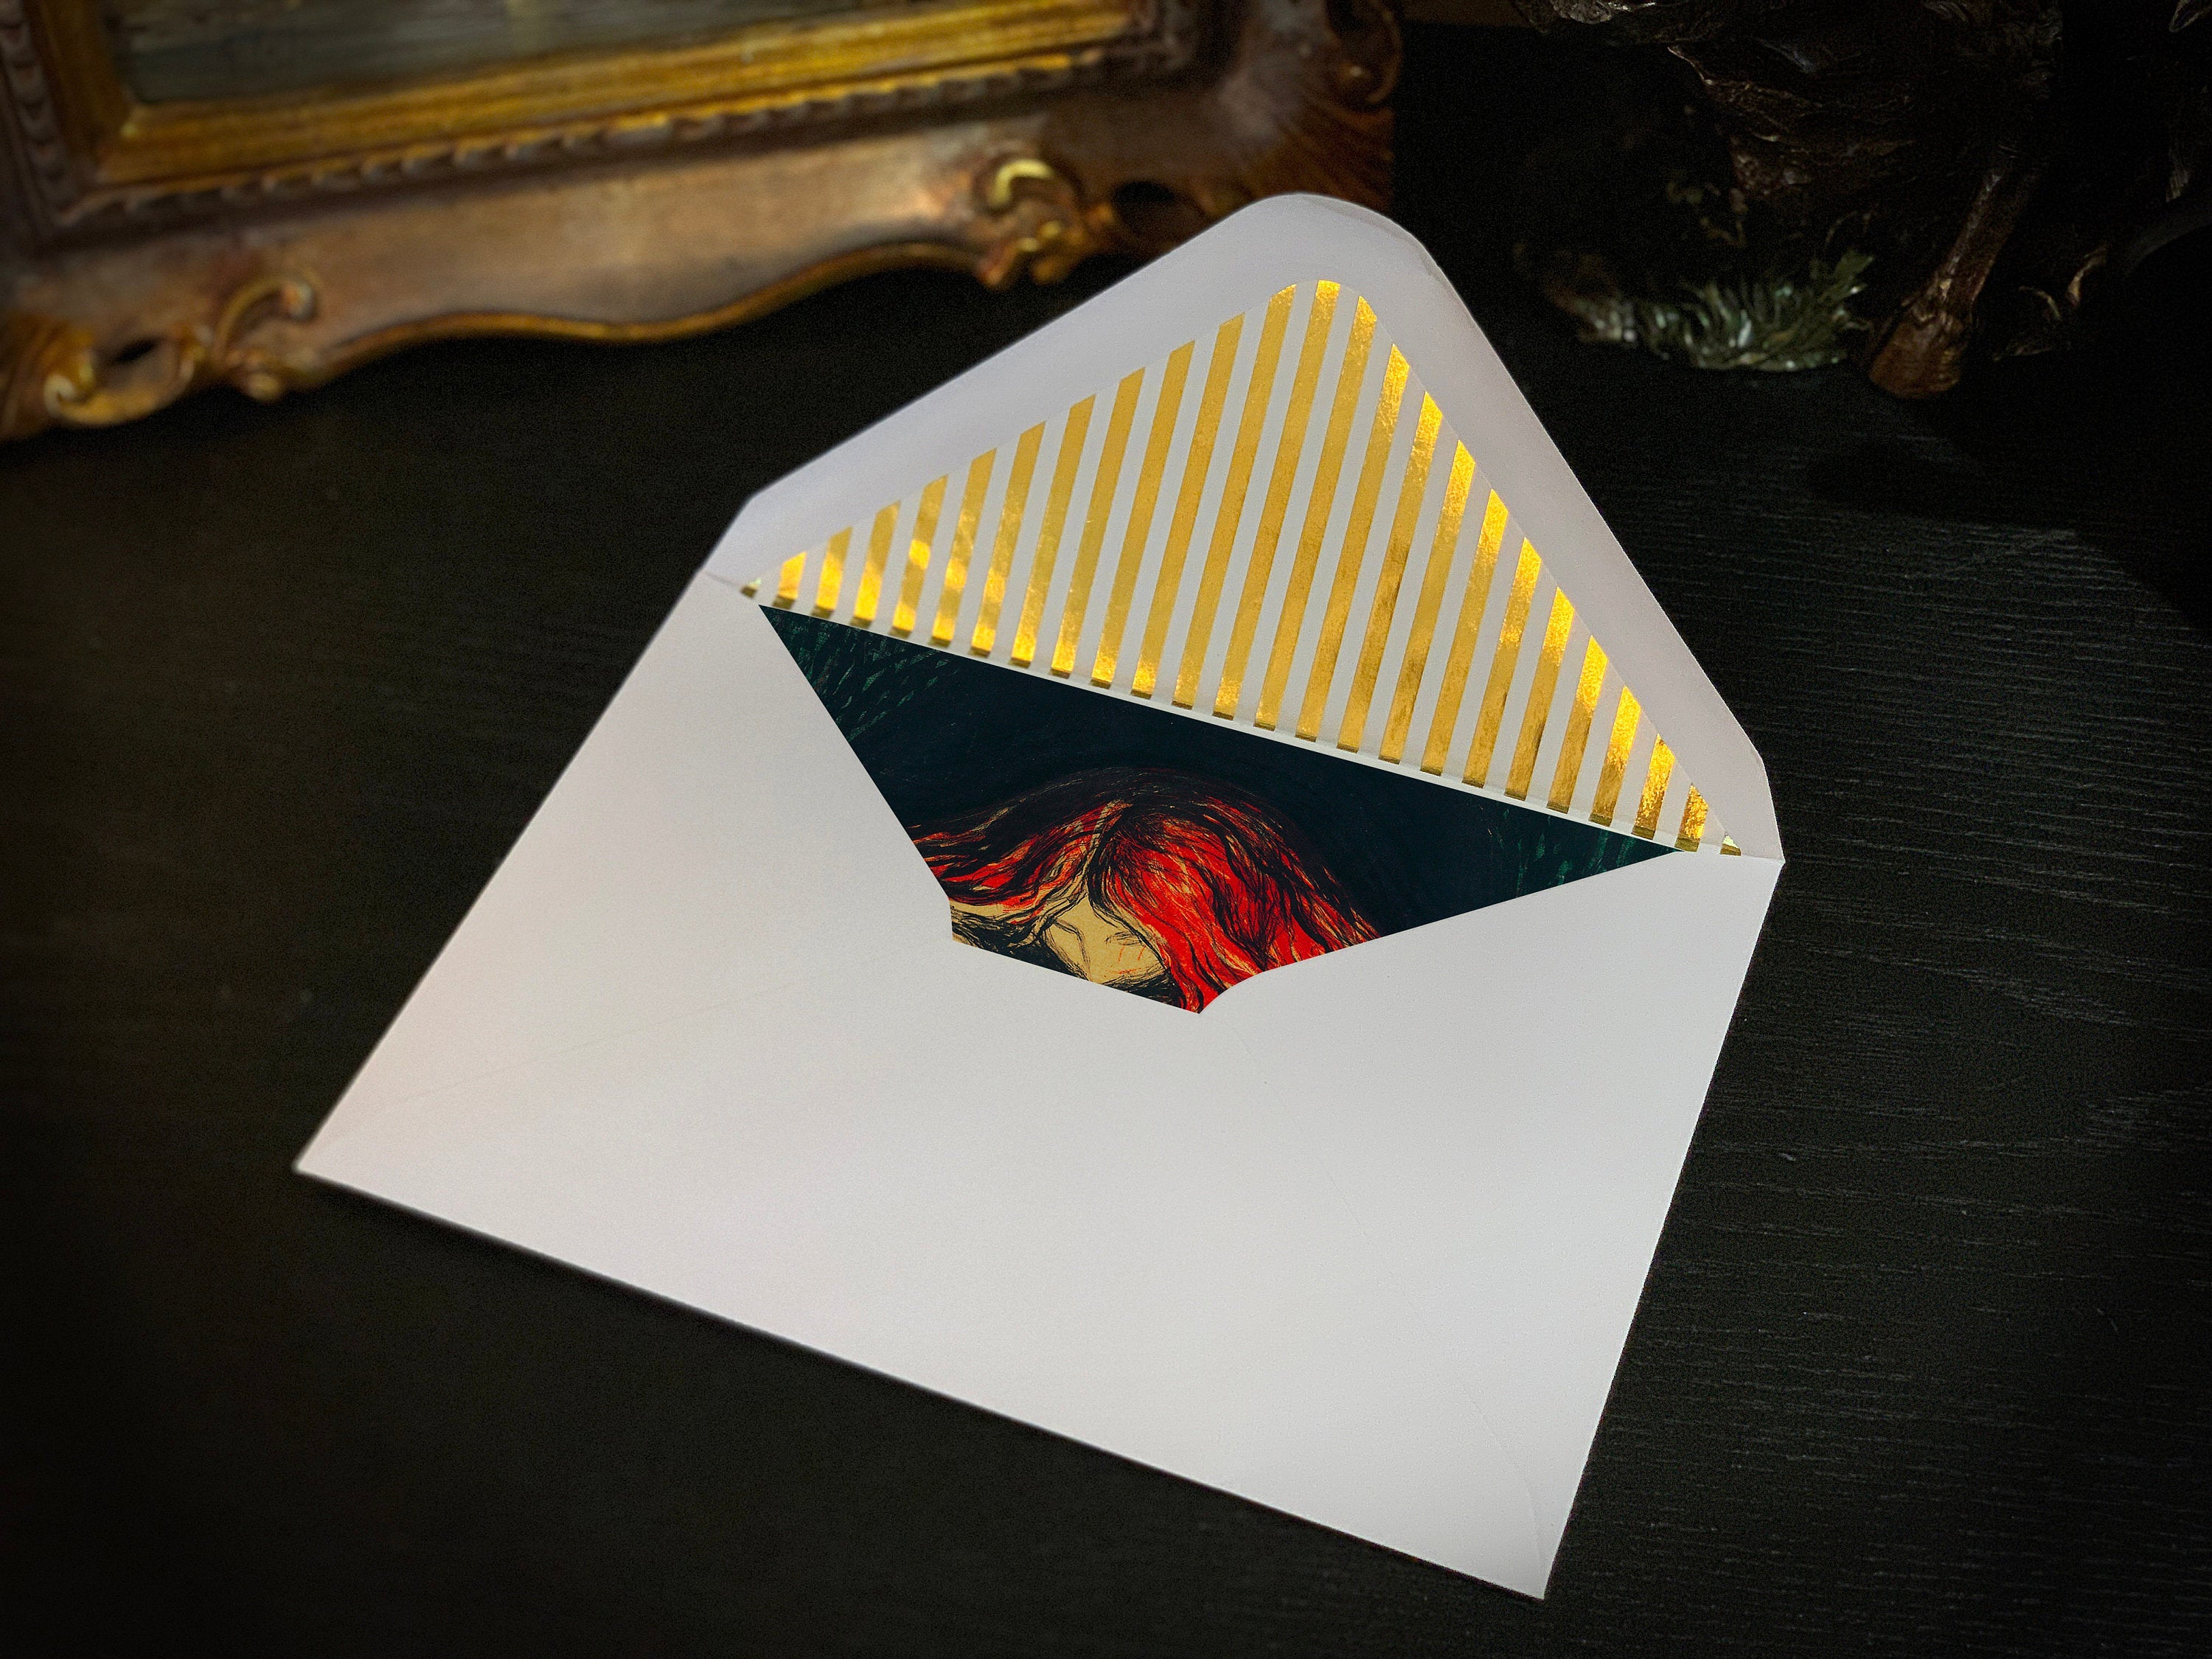 The Vampire II, or Love and Pain, by Edvard Munch, Gothic Greeting Card with Elegant Striped Gold Foil Envelope, 1 Card/Envelope